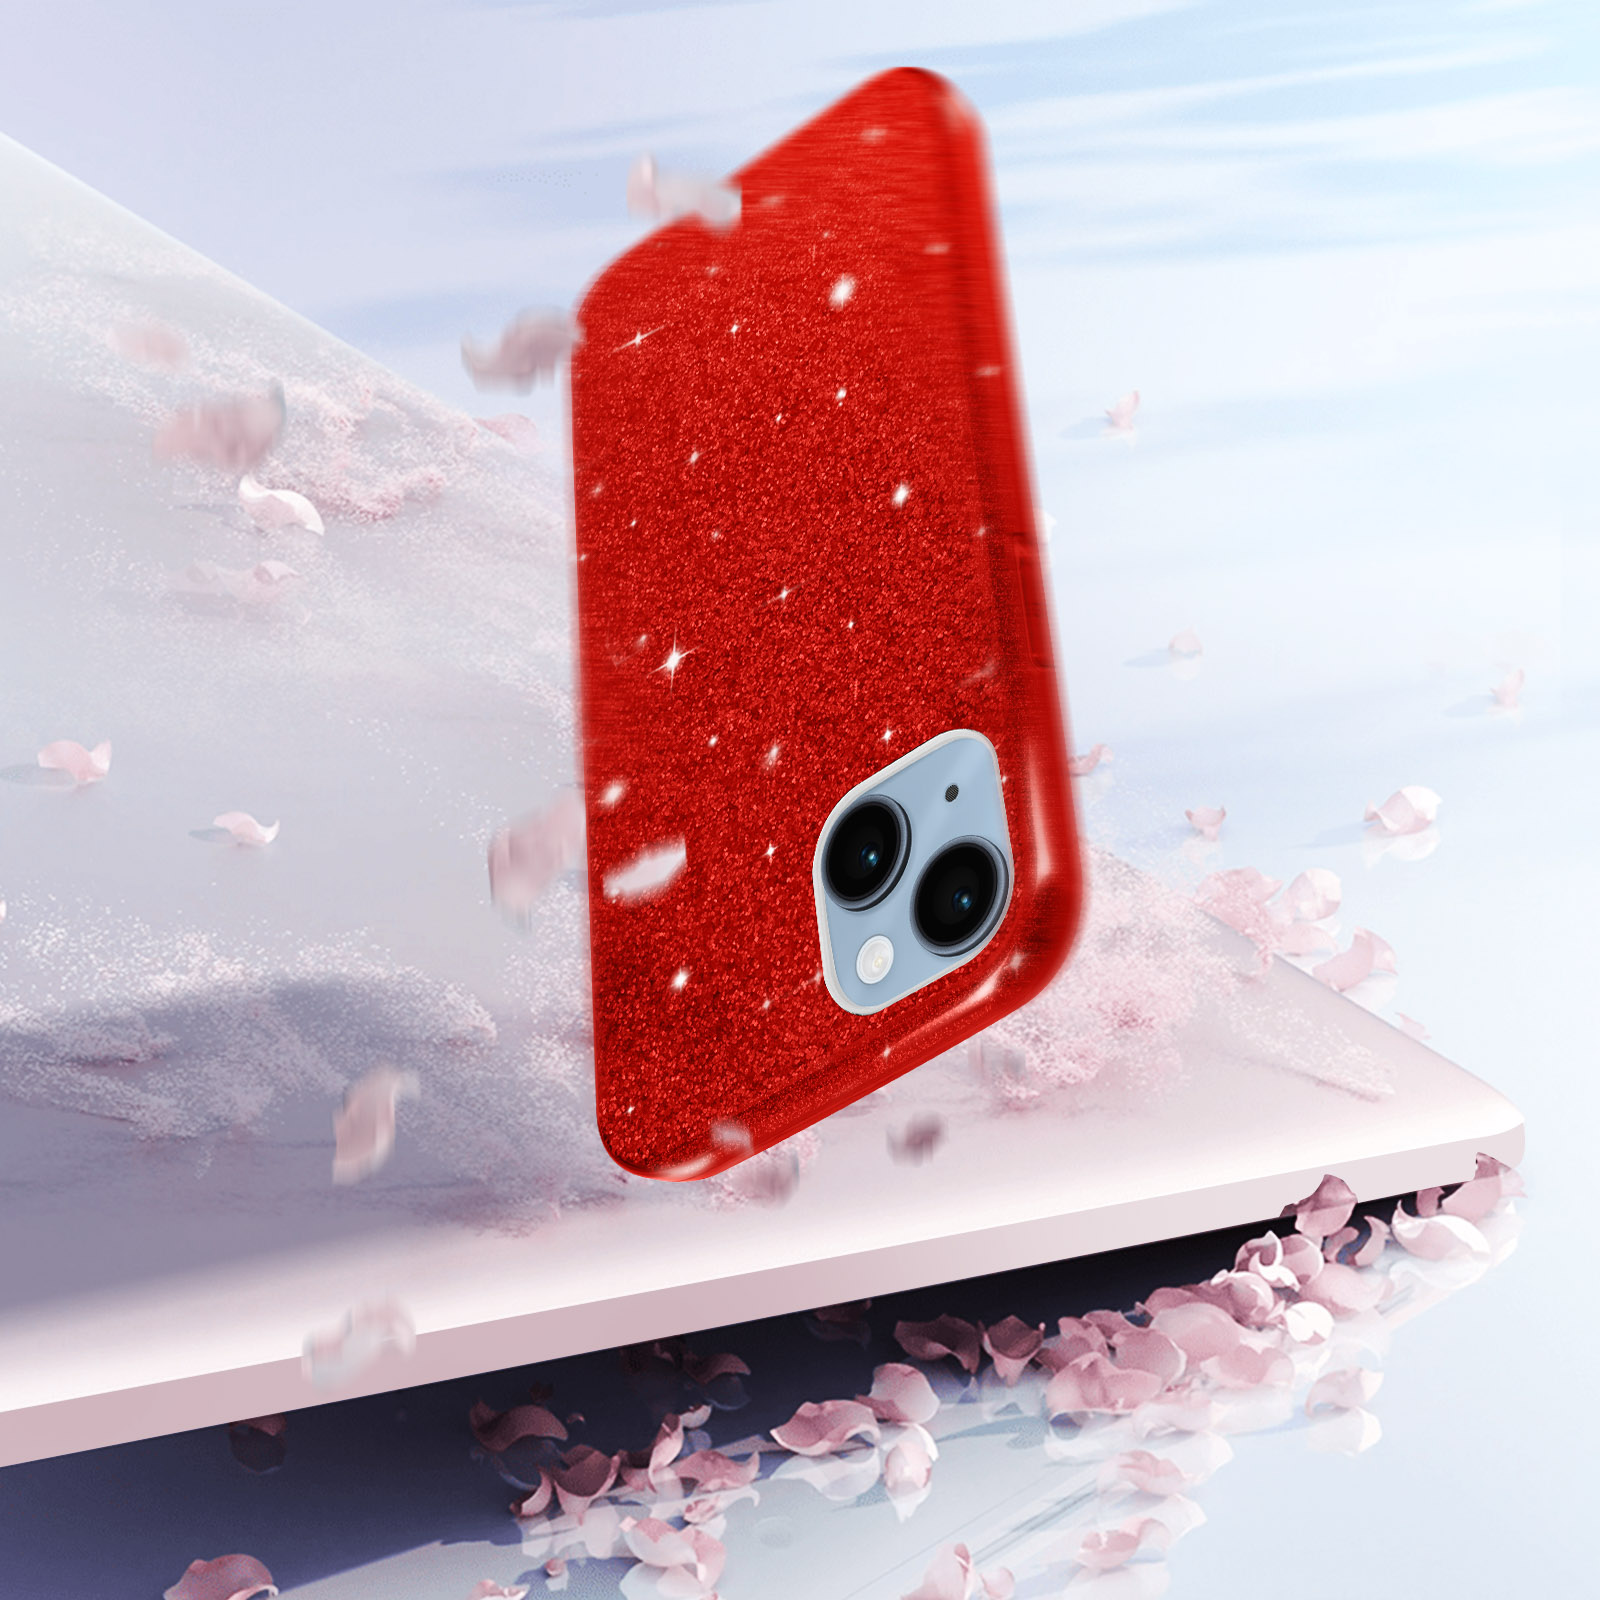 AVIZAR Papay iPhone Apple, 14, Rot Series, Backcover